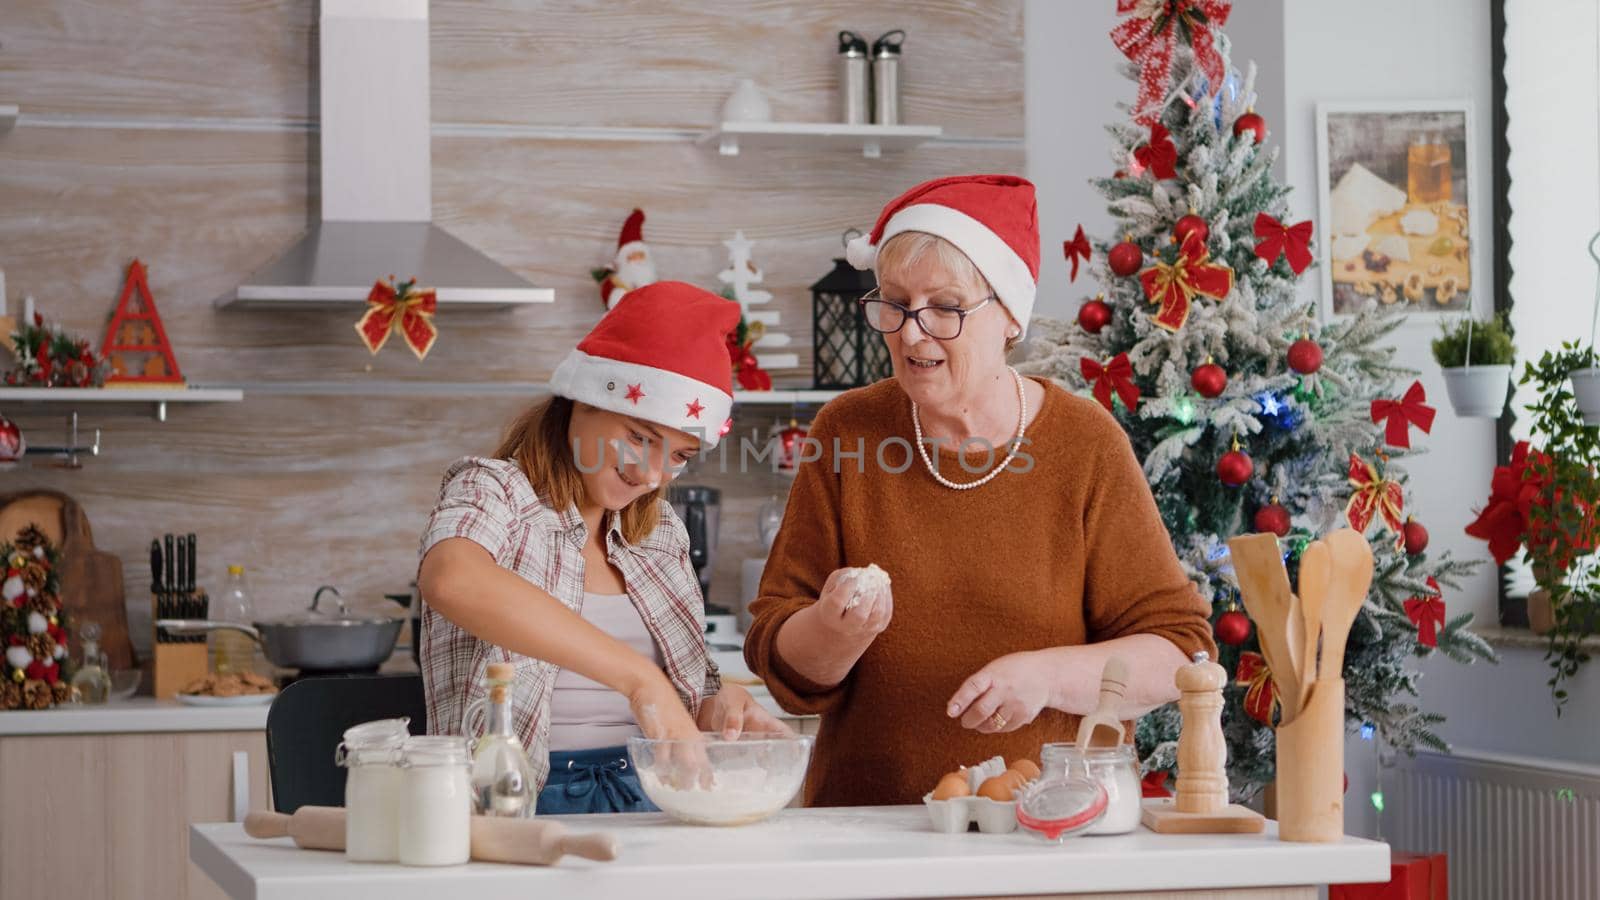 Grandparent helping grandchild preparing homemade traditional cookie dough in culinary kitchen by DCStudio